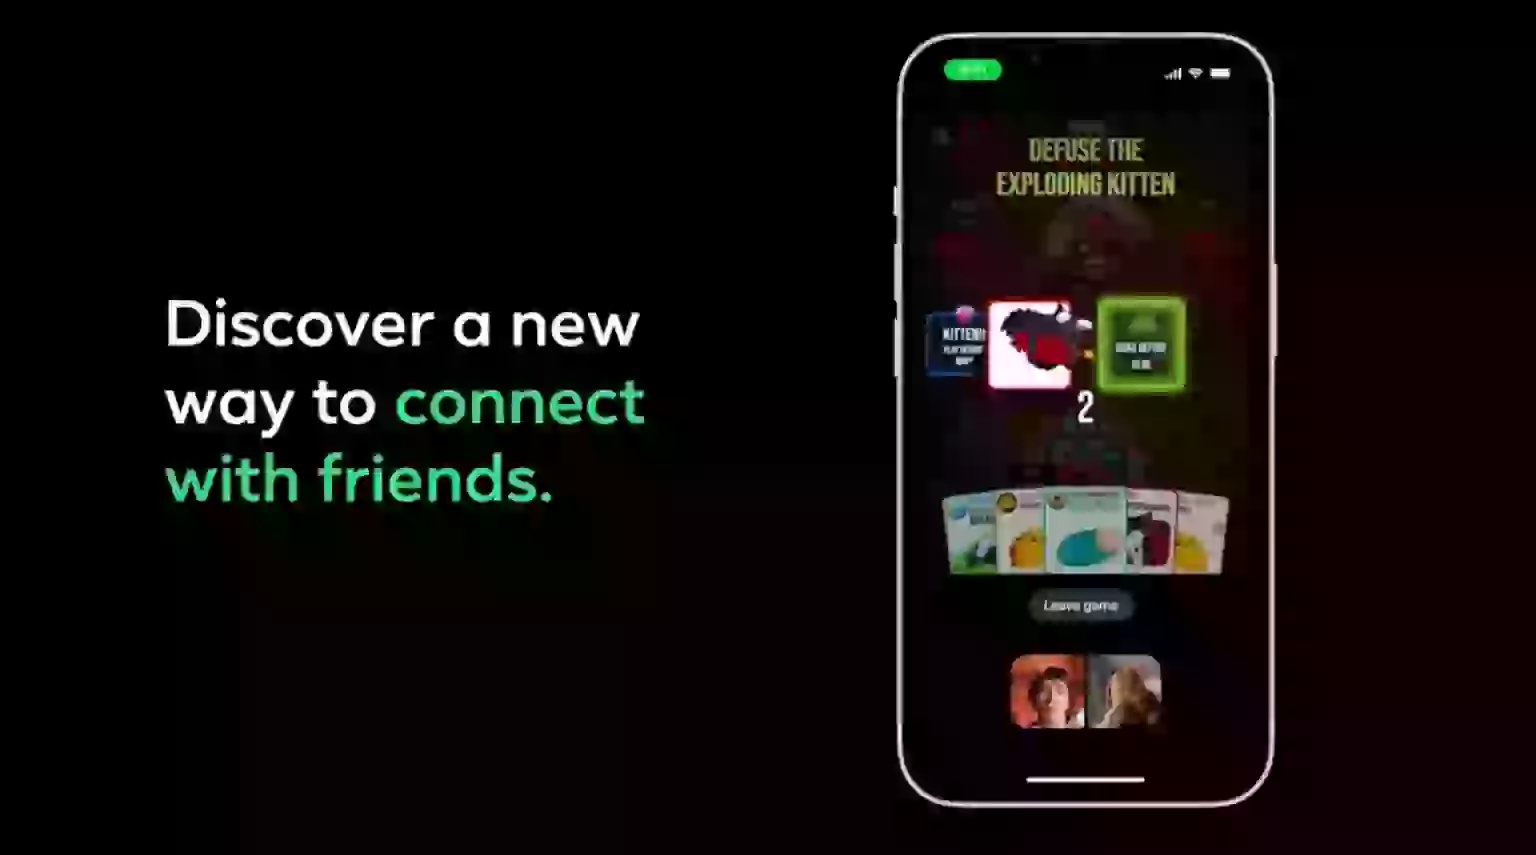 This App Lets You Video Call & Play Games With Friends Without